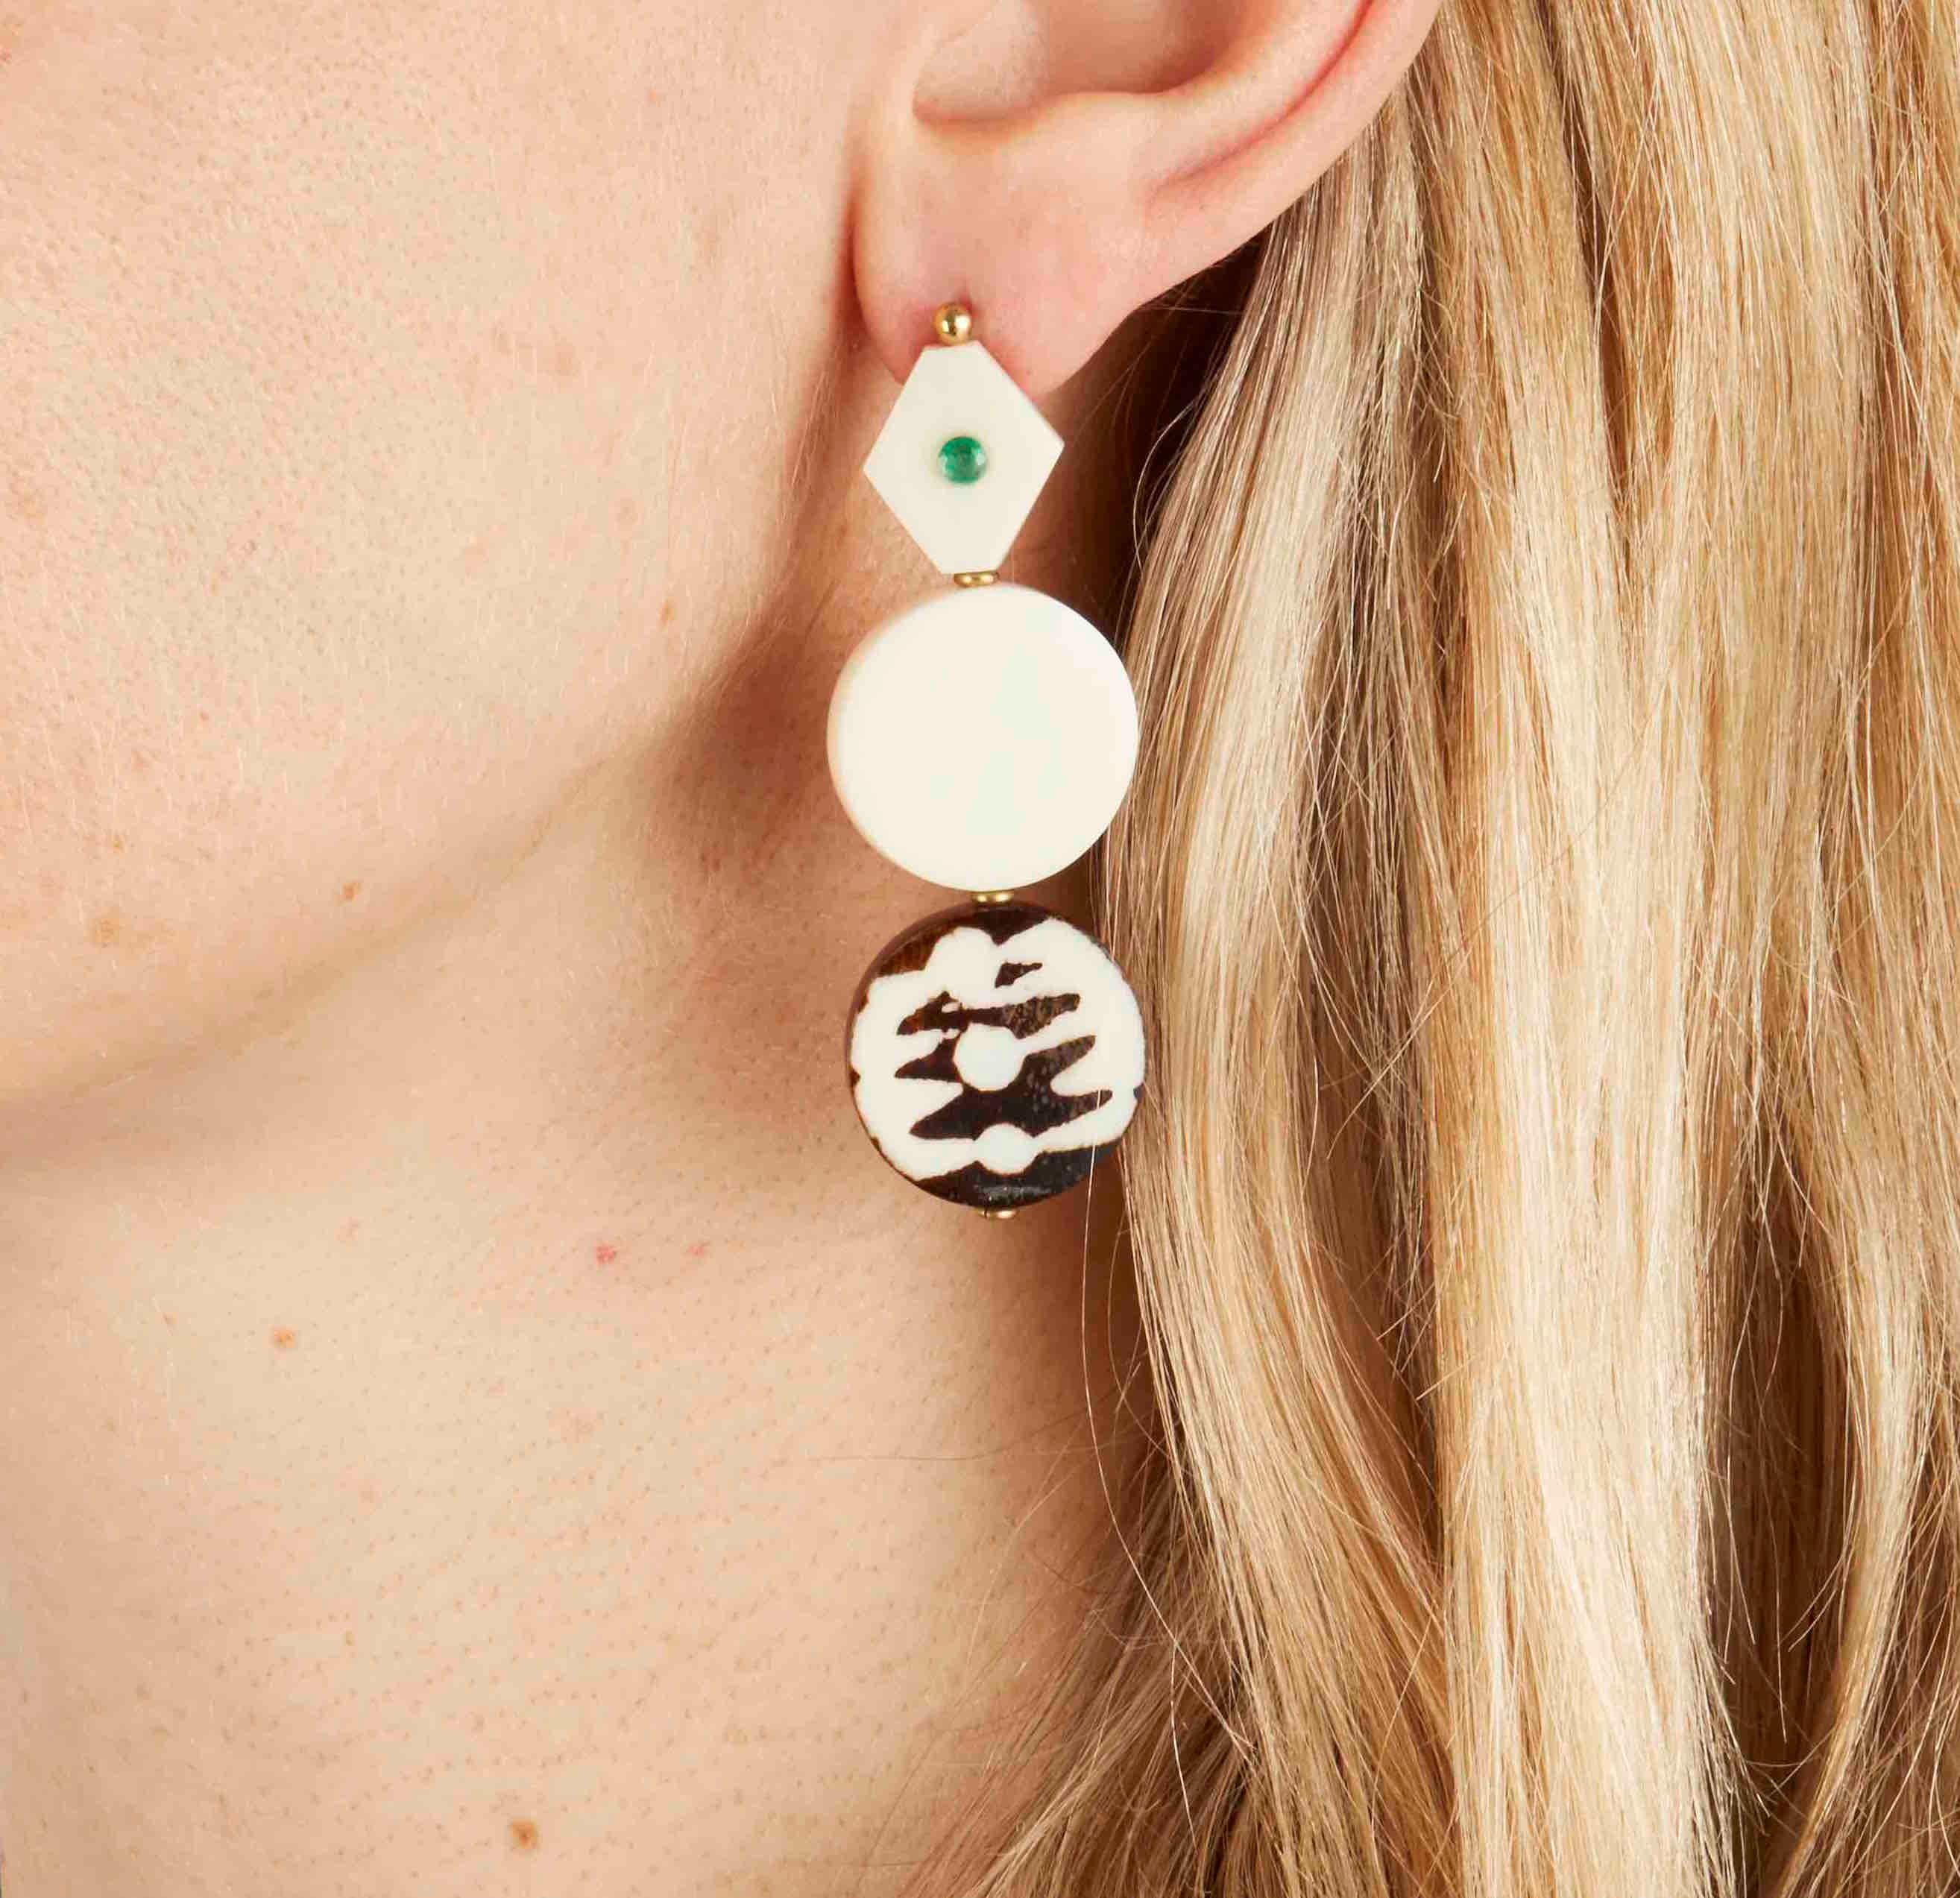 The finest carved African camel bone earrings handmade in London using solid brass with solid silver pin-backs, set with African emerald. These earrings feature a batik design process ancient to Kenyan tribes.

The camel bone is hand carved by